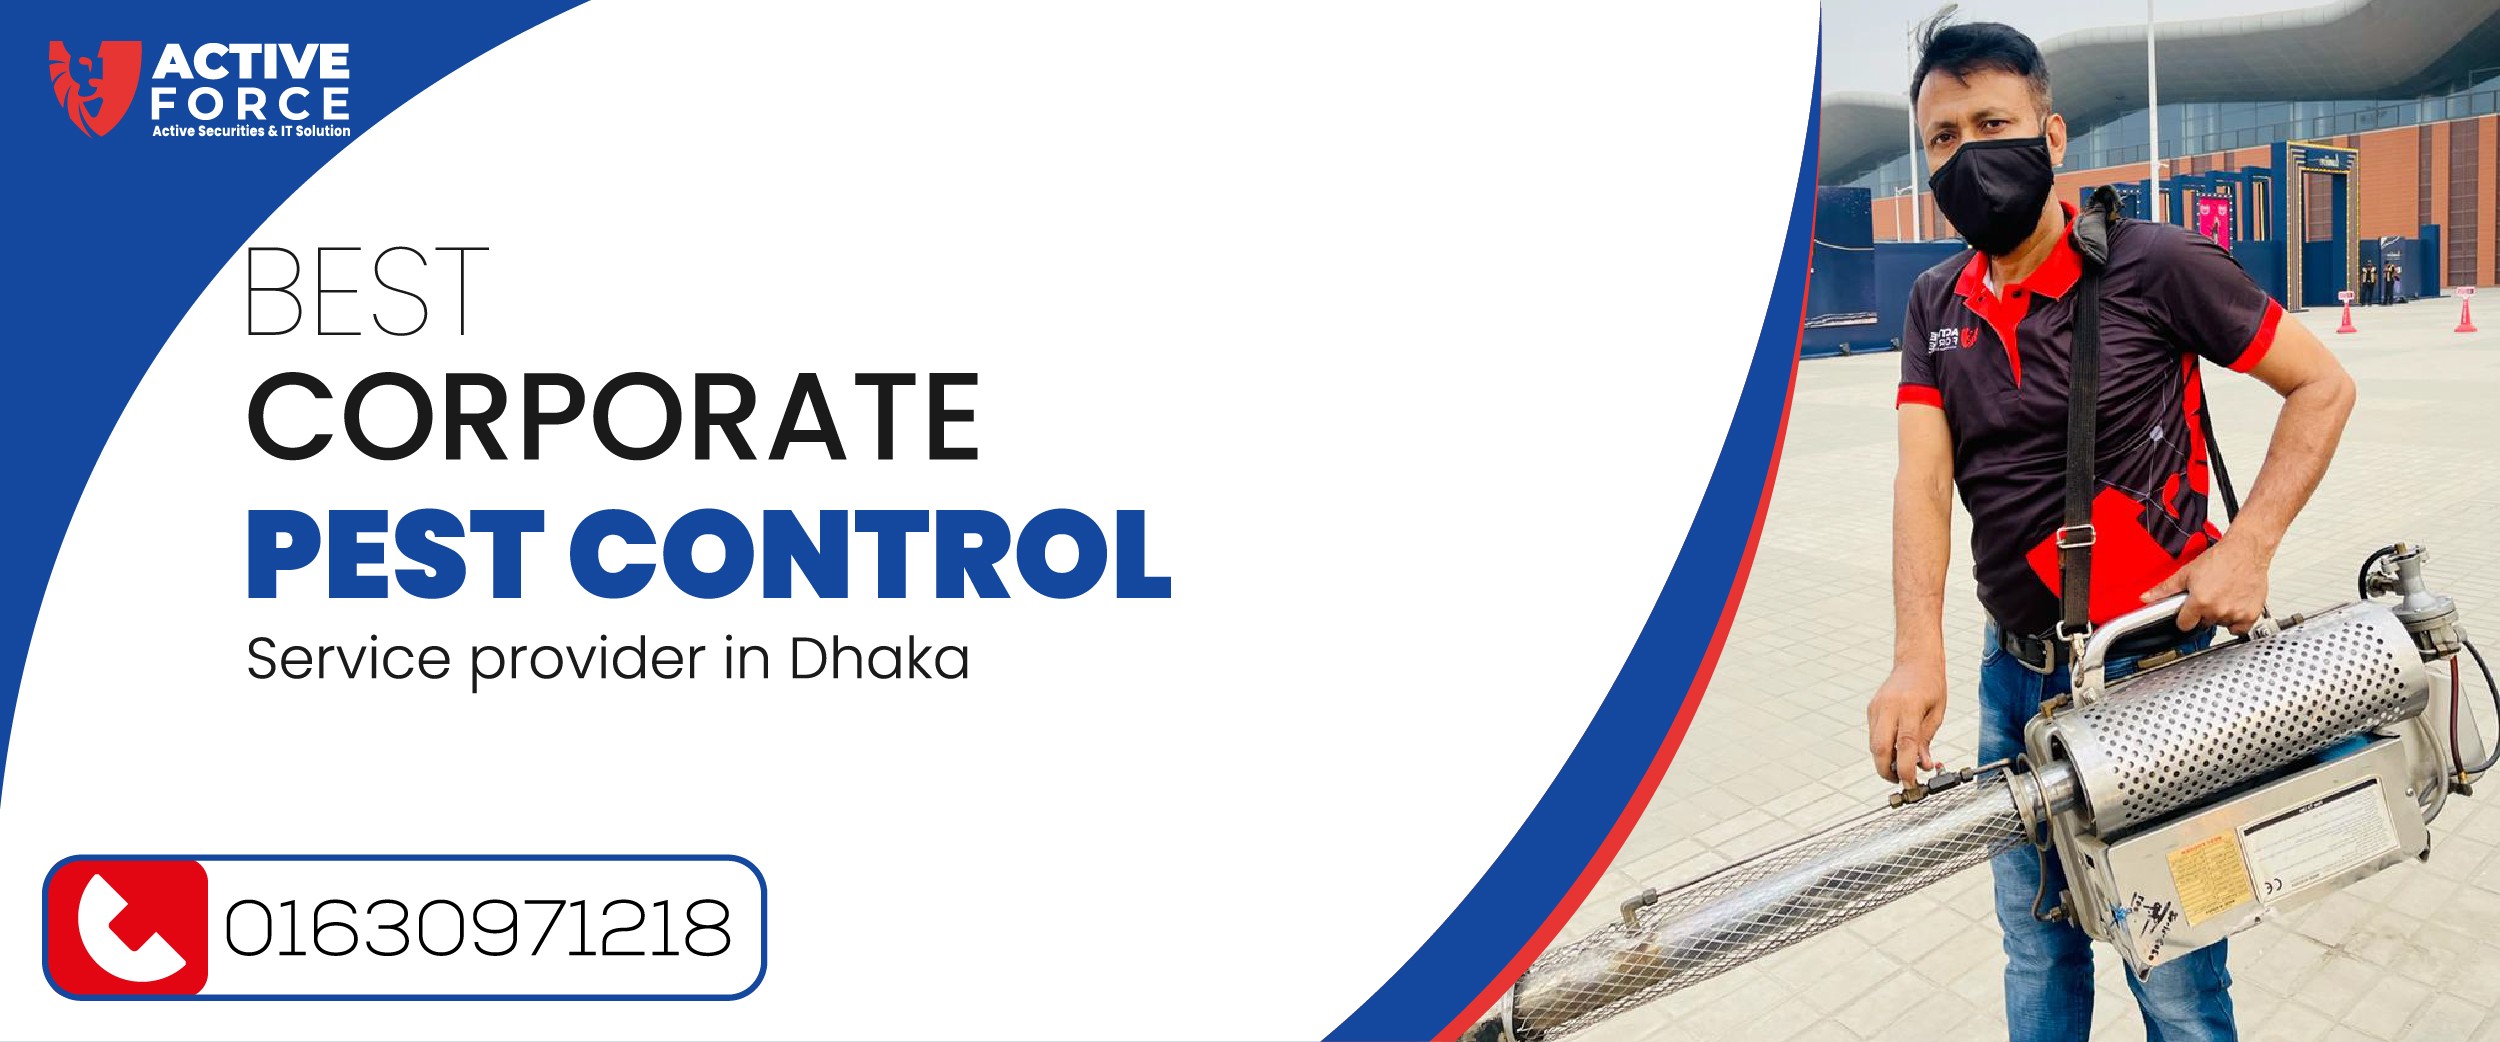 best corporate pest control service provider in Dhaka